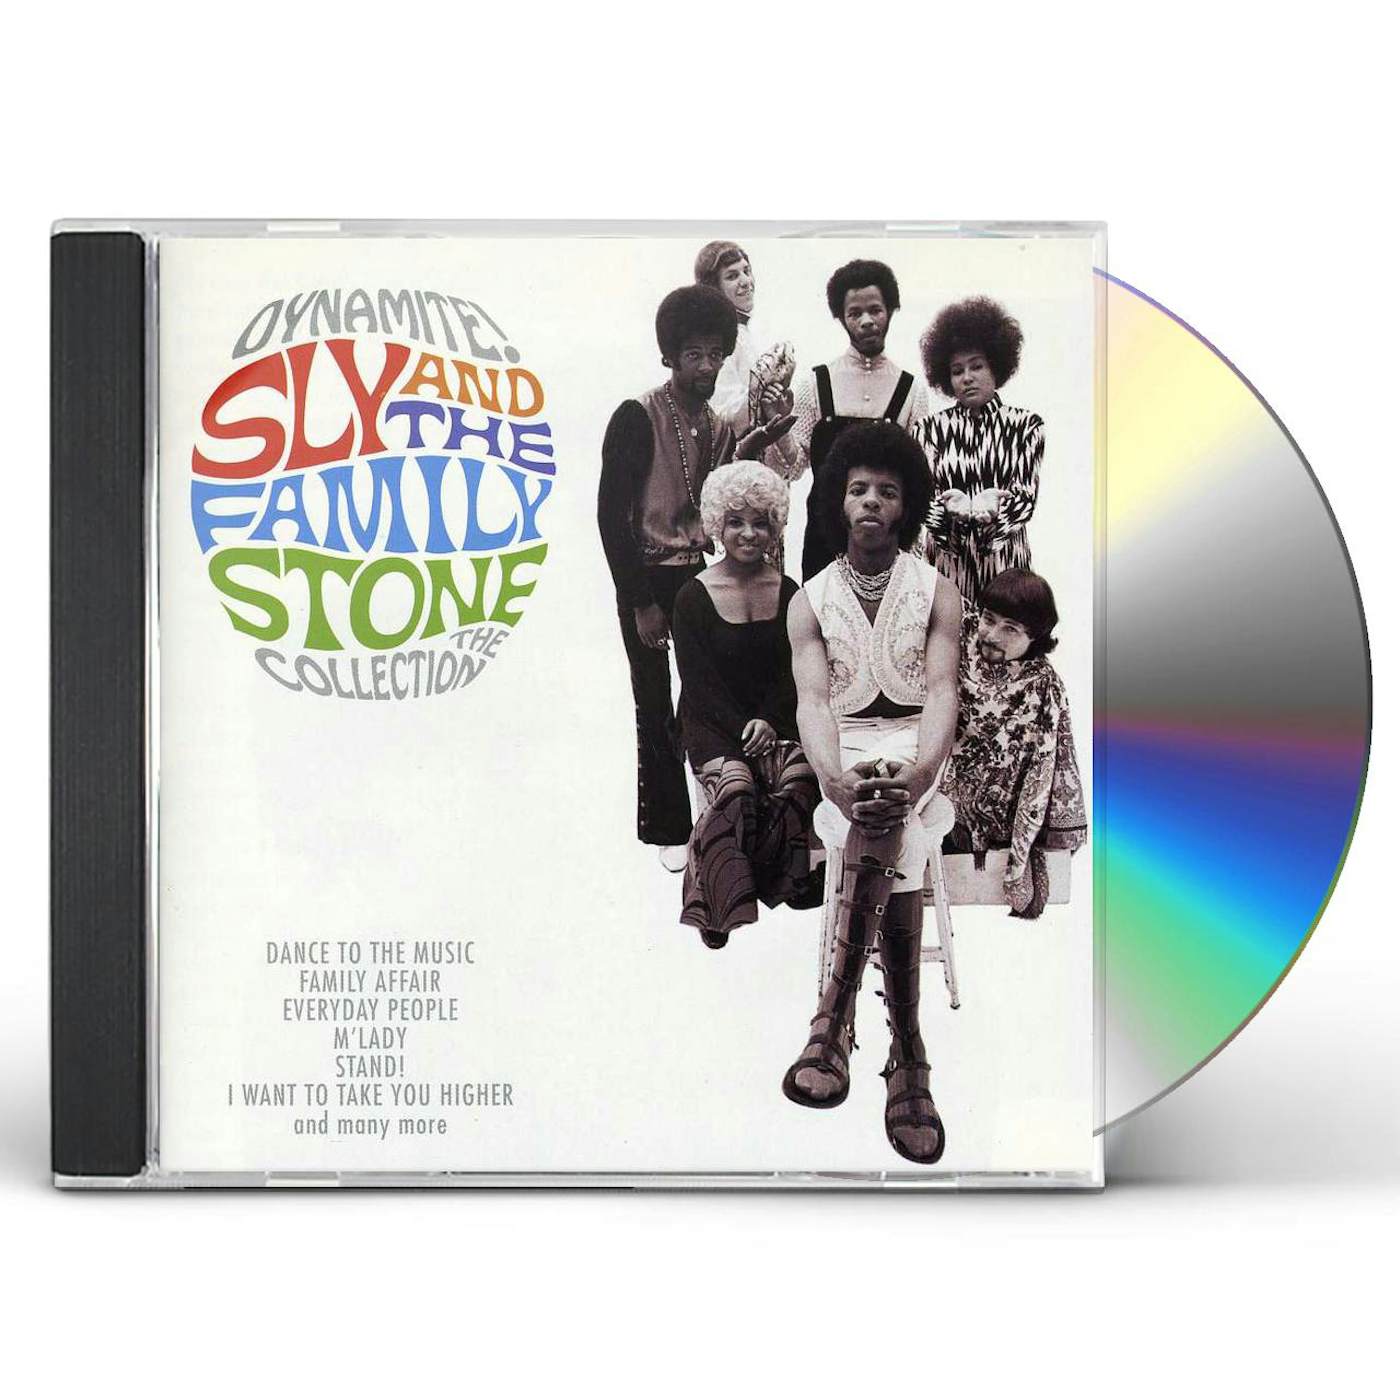 Sly & The Family Stone DYNAMITE: COLLECTION CD